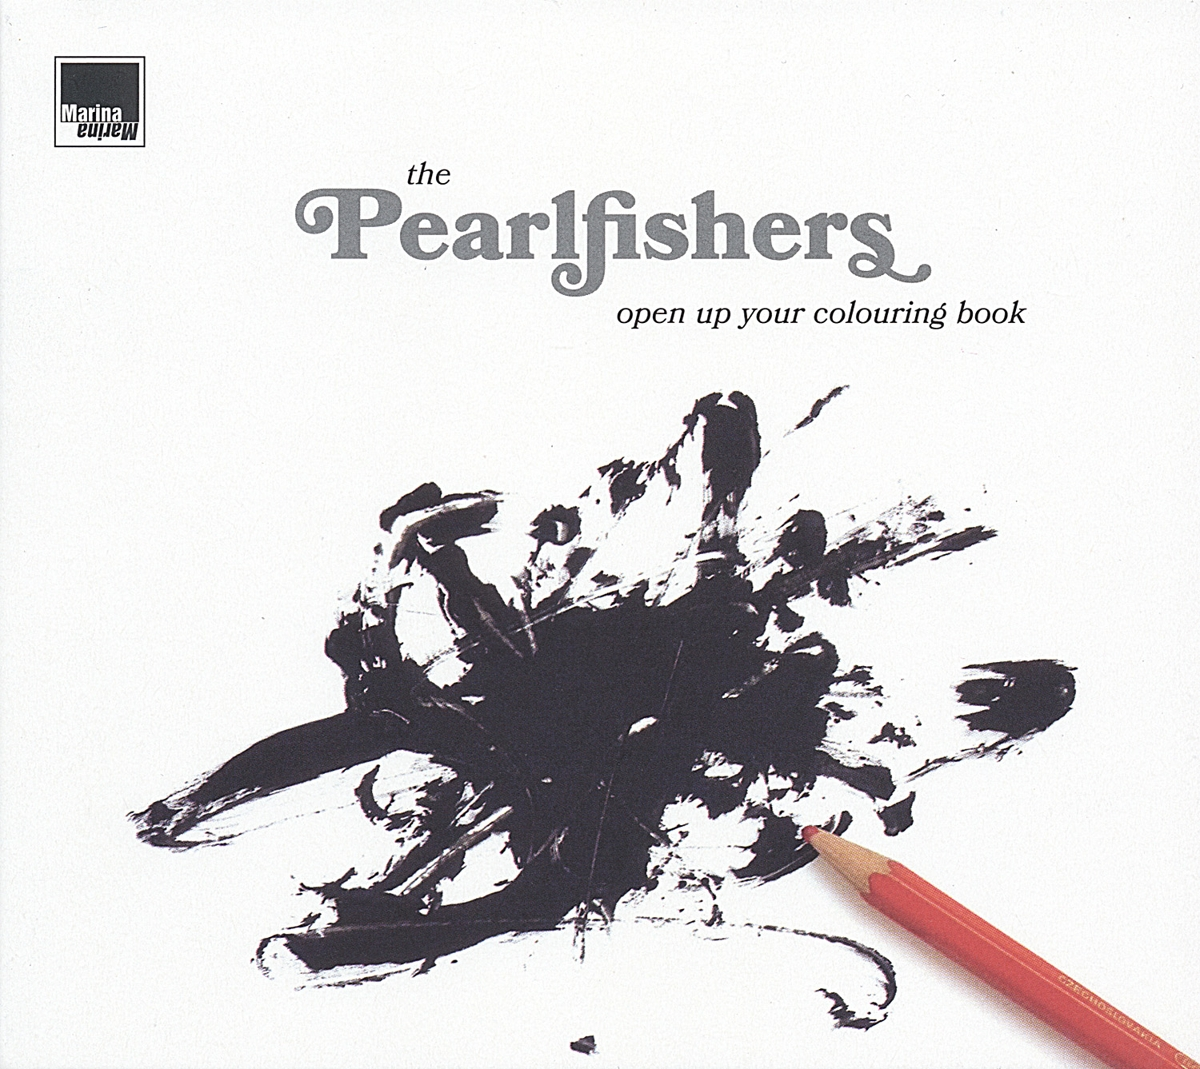 Your Colouring Up (CD) - Book - The Pearlfishers Open